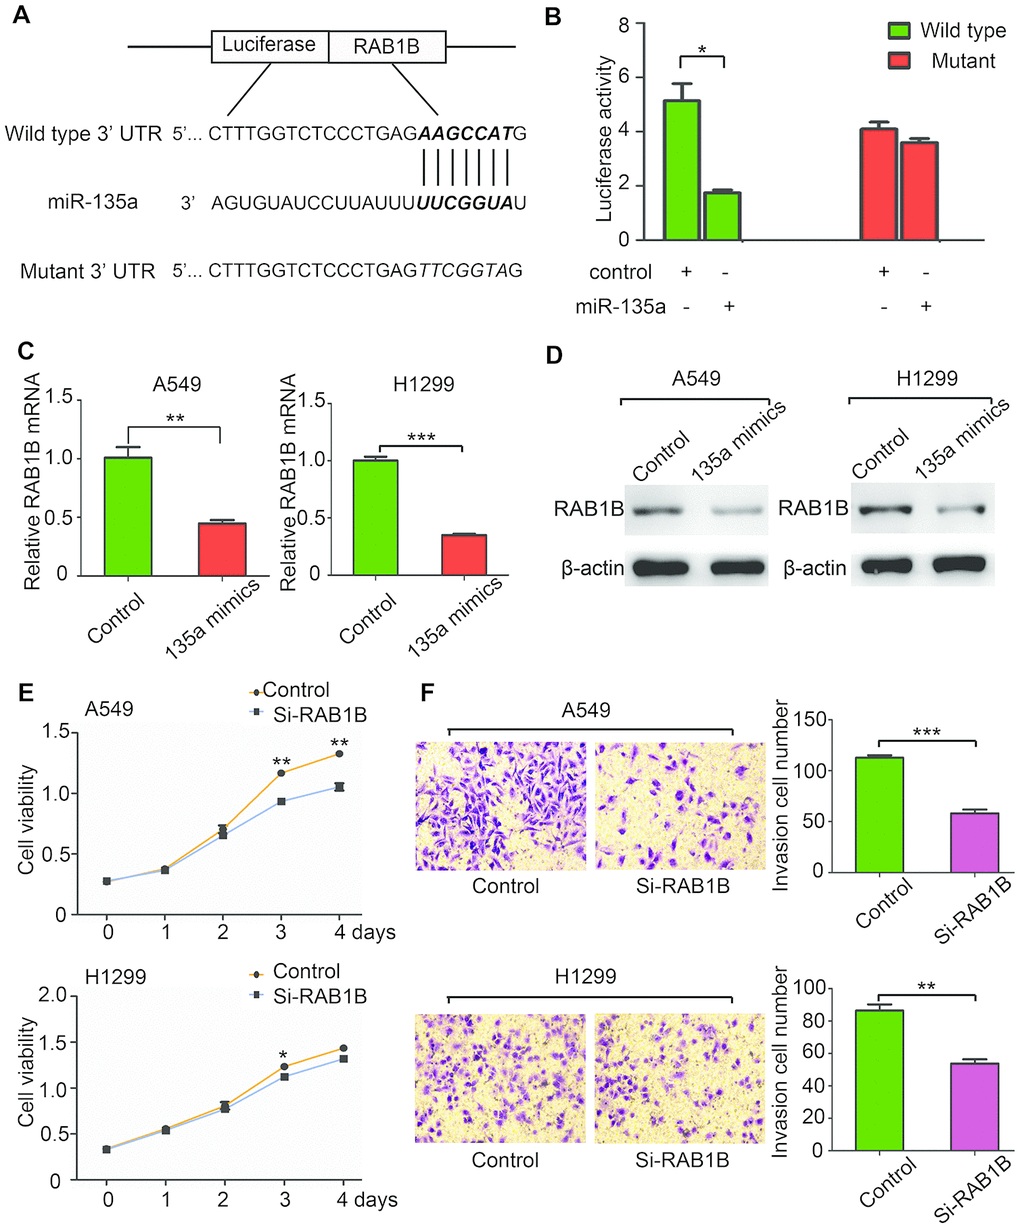 MiR-135a negatively regulates RAB1B and suppresses NSCLC cell growth and invasion. (A) Putative miR-135a-binding sites in the RAB1B 3’UTR. The nucleotide sequence illustrated the predicted base-pairing between miR-135a and the RAB1B 3’-UTR. (B) Luciferase reporter assays demonstrated that the reporter activity of HEK-293T cells decreased by over 50% upon cotransfection of the wild-type RAB1B 3′-UTR reporter construct and miR-135a mimics. (C, D) Real-time PCR (C) and western blotting (D) analysis of endogenous RAB1B expression in A549 and H1299 cells after transfection with miR-135a mimic vectors. (E, F) A549 and H1299 cells were transfected with RAB1B-specific siRNAs and subjected to proliferation (E) and invasion (F) assays as described above. Data are expressed as the mean ± sd. * p 